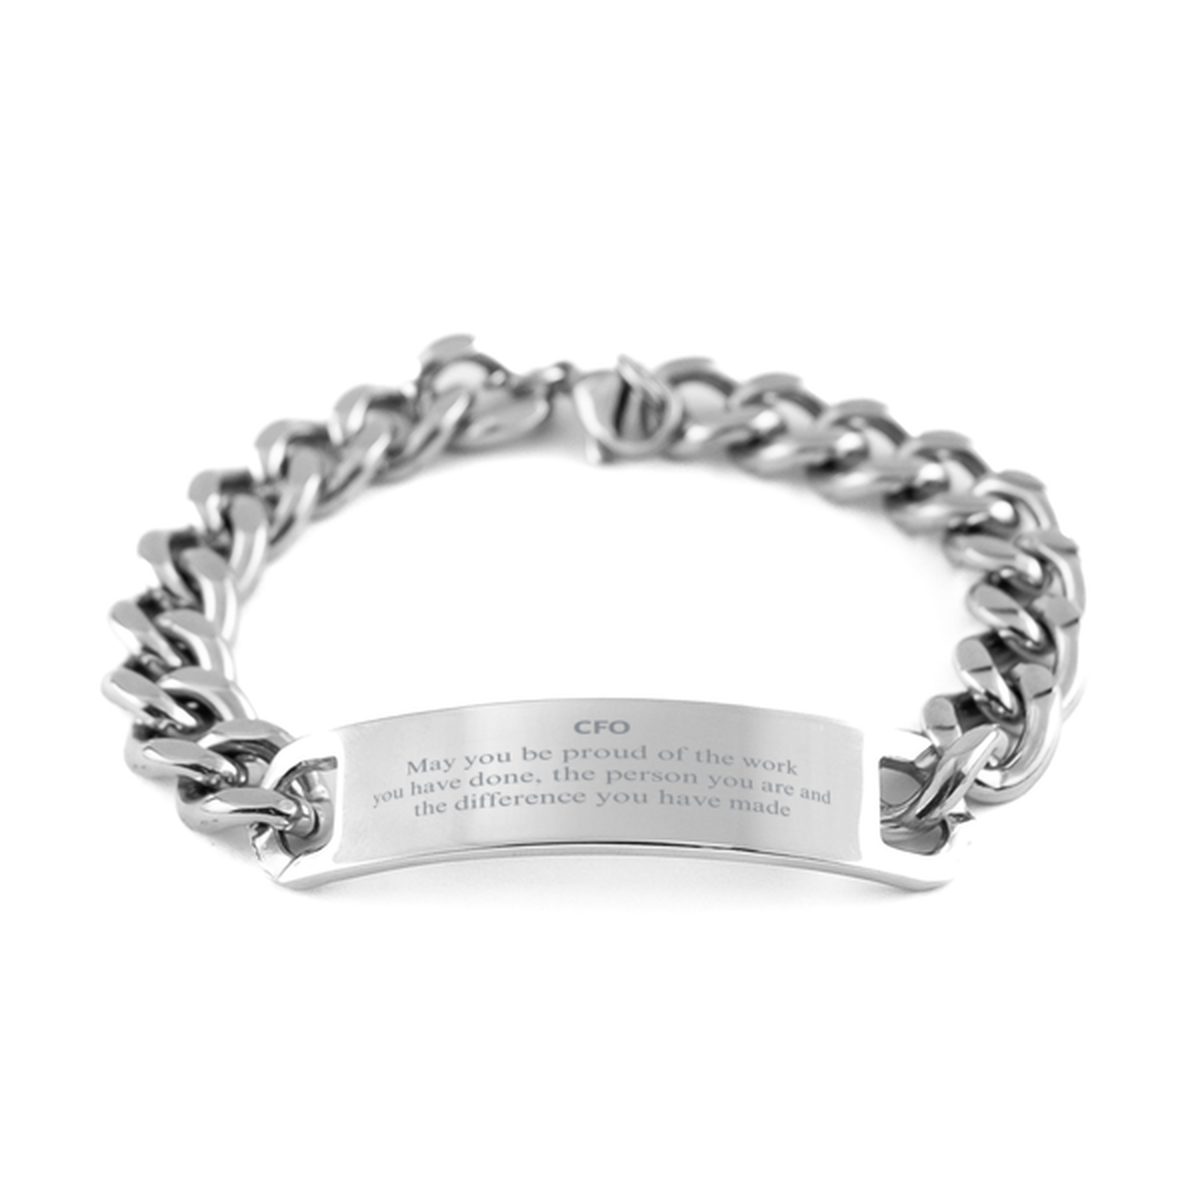 CFO May you be proud of the work you have done, Retirement CFO Cuban Chain Stainless Steel Bracelet for Colleague Appreciation Gifts Amazing for CFO